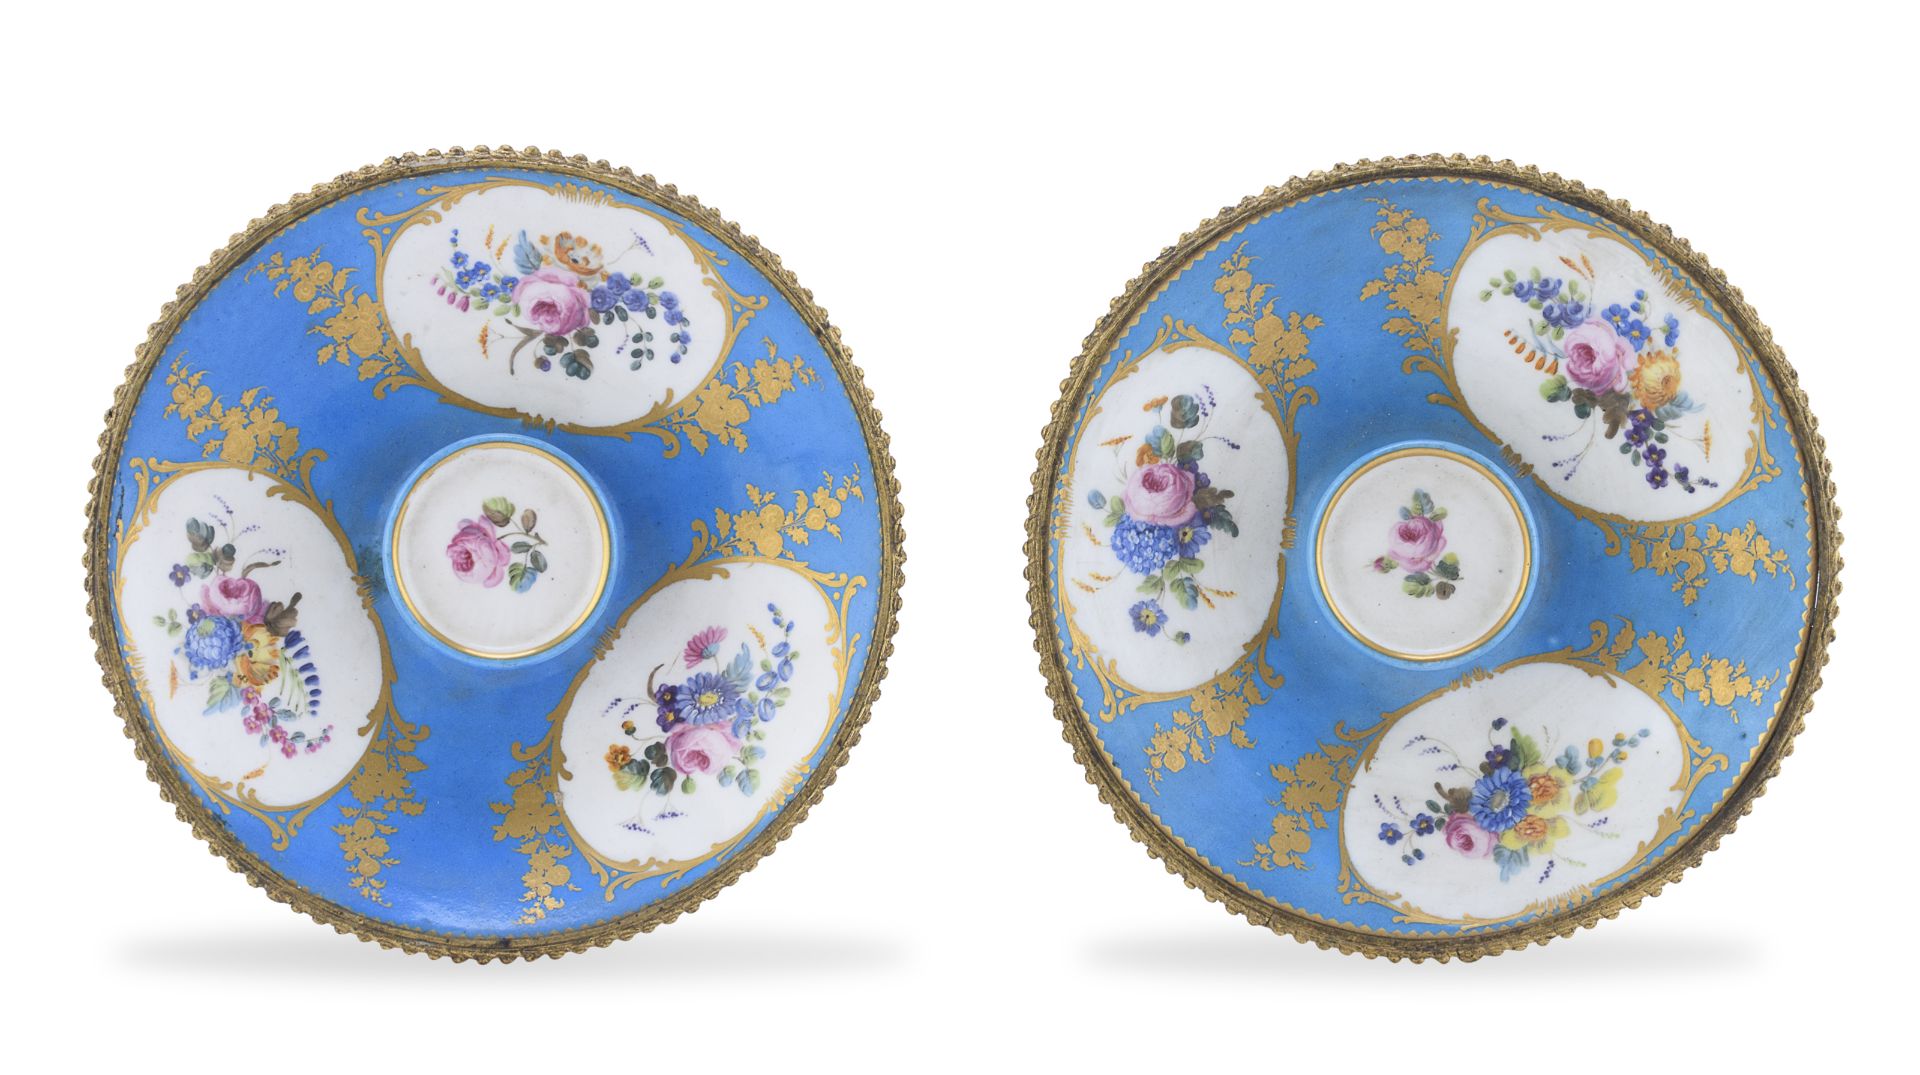 PAIR OF PORCELAIN STANDS PROBABLY SEVRES 19th CENTURY - Image 2 of 2